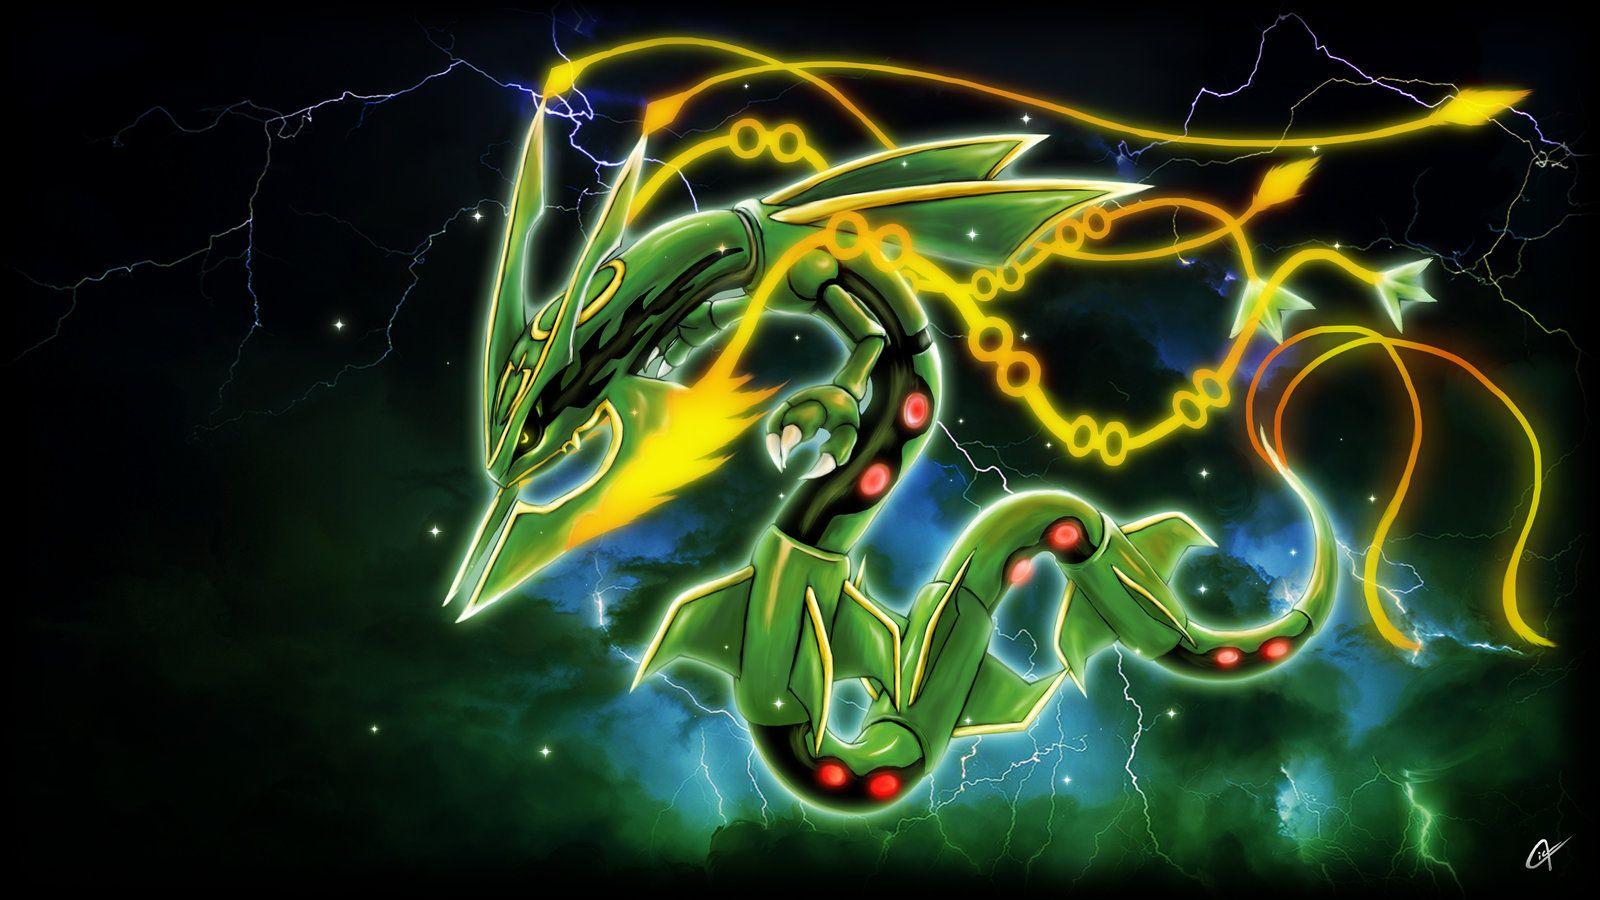 Download The Unrivaled Might of Rayquaza Wallpaper